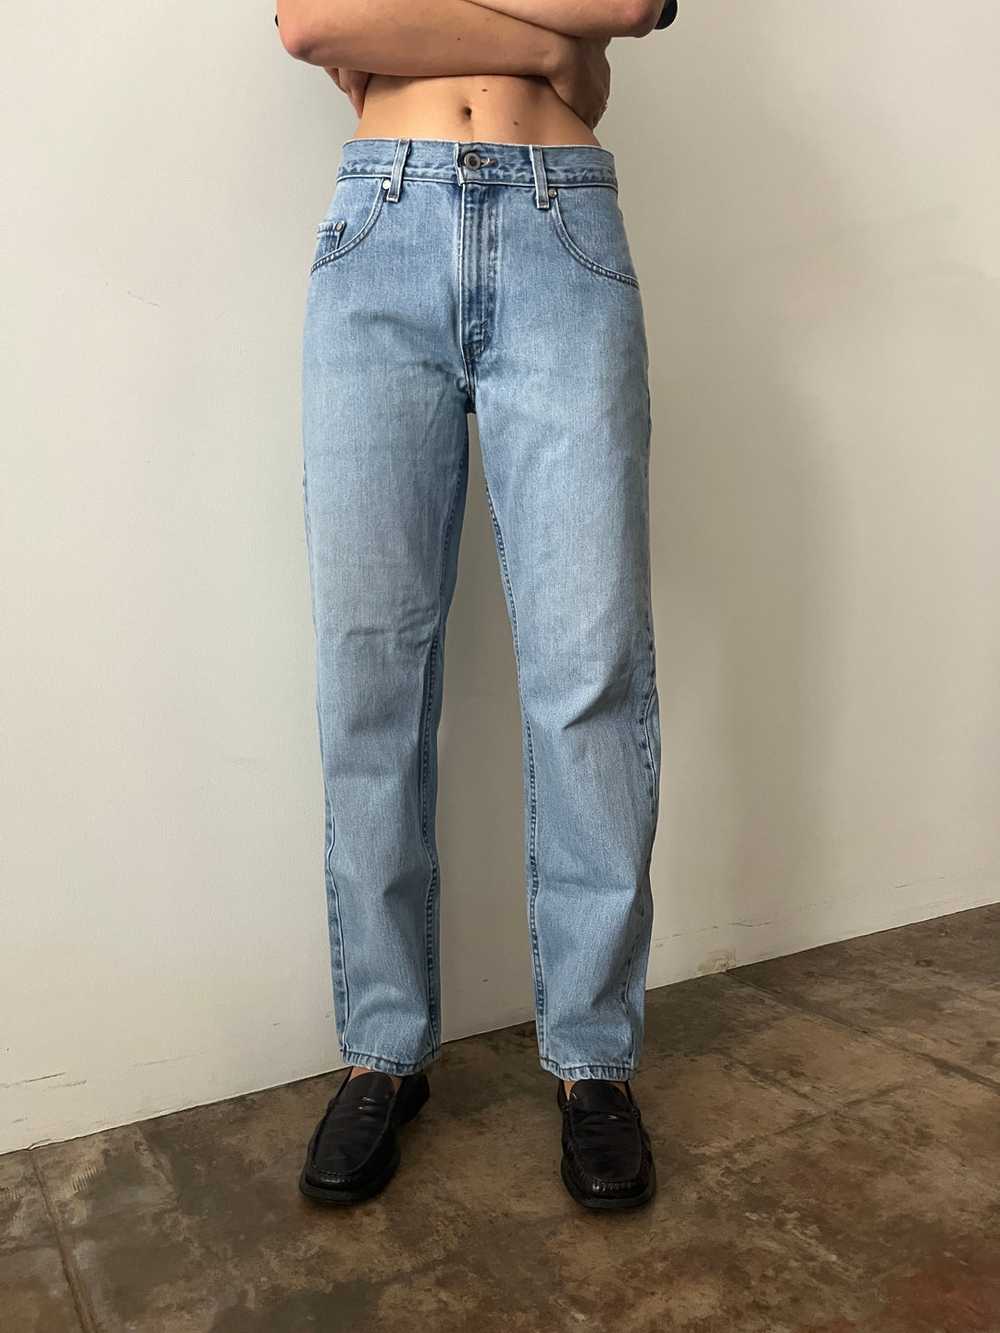 90s Levis Silvertab Jeans - image 2